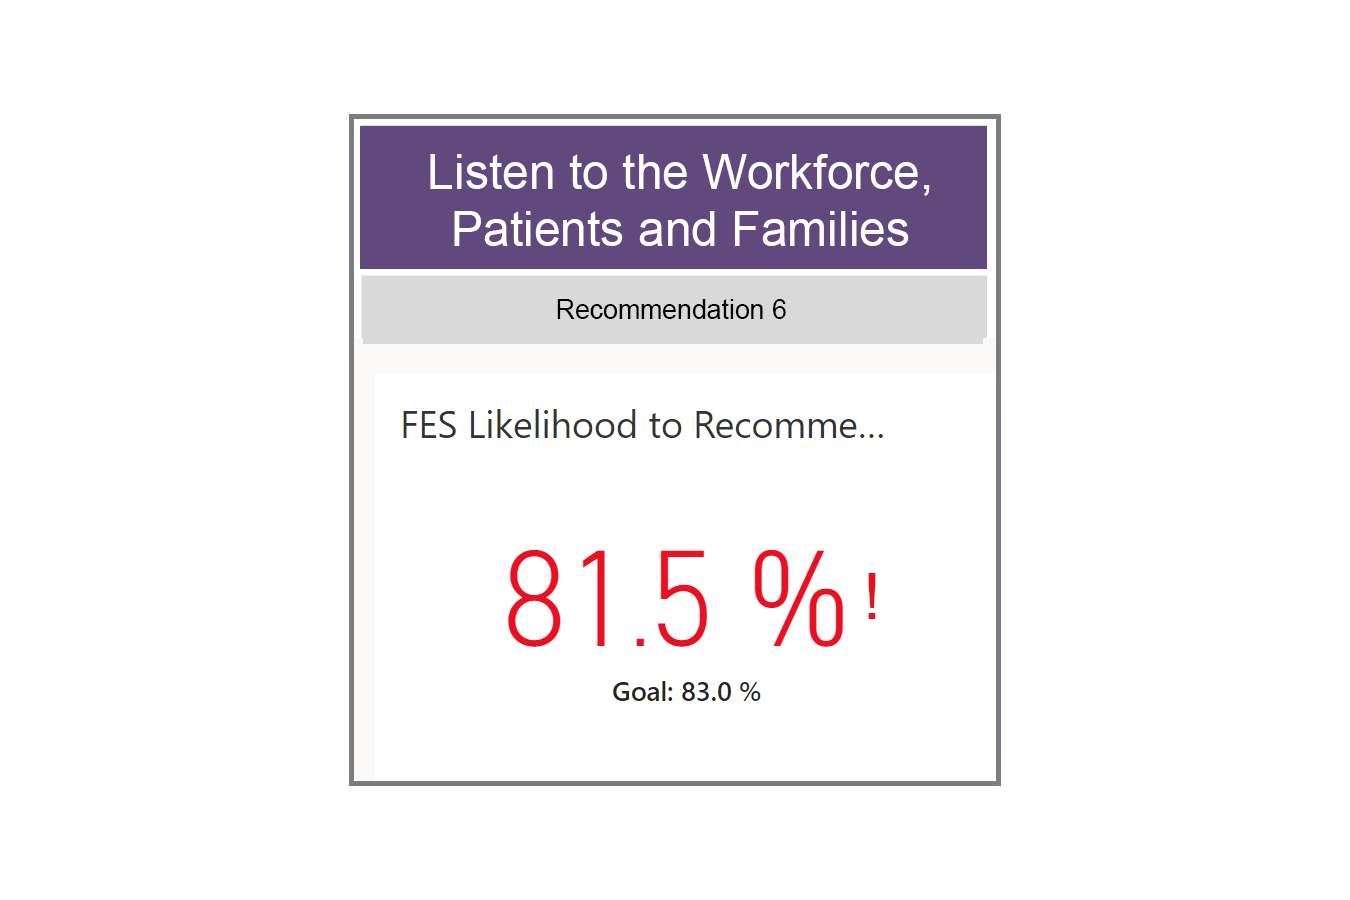 Listen to workforce, patients, and families recommendation graphic